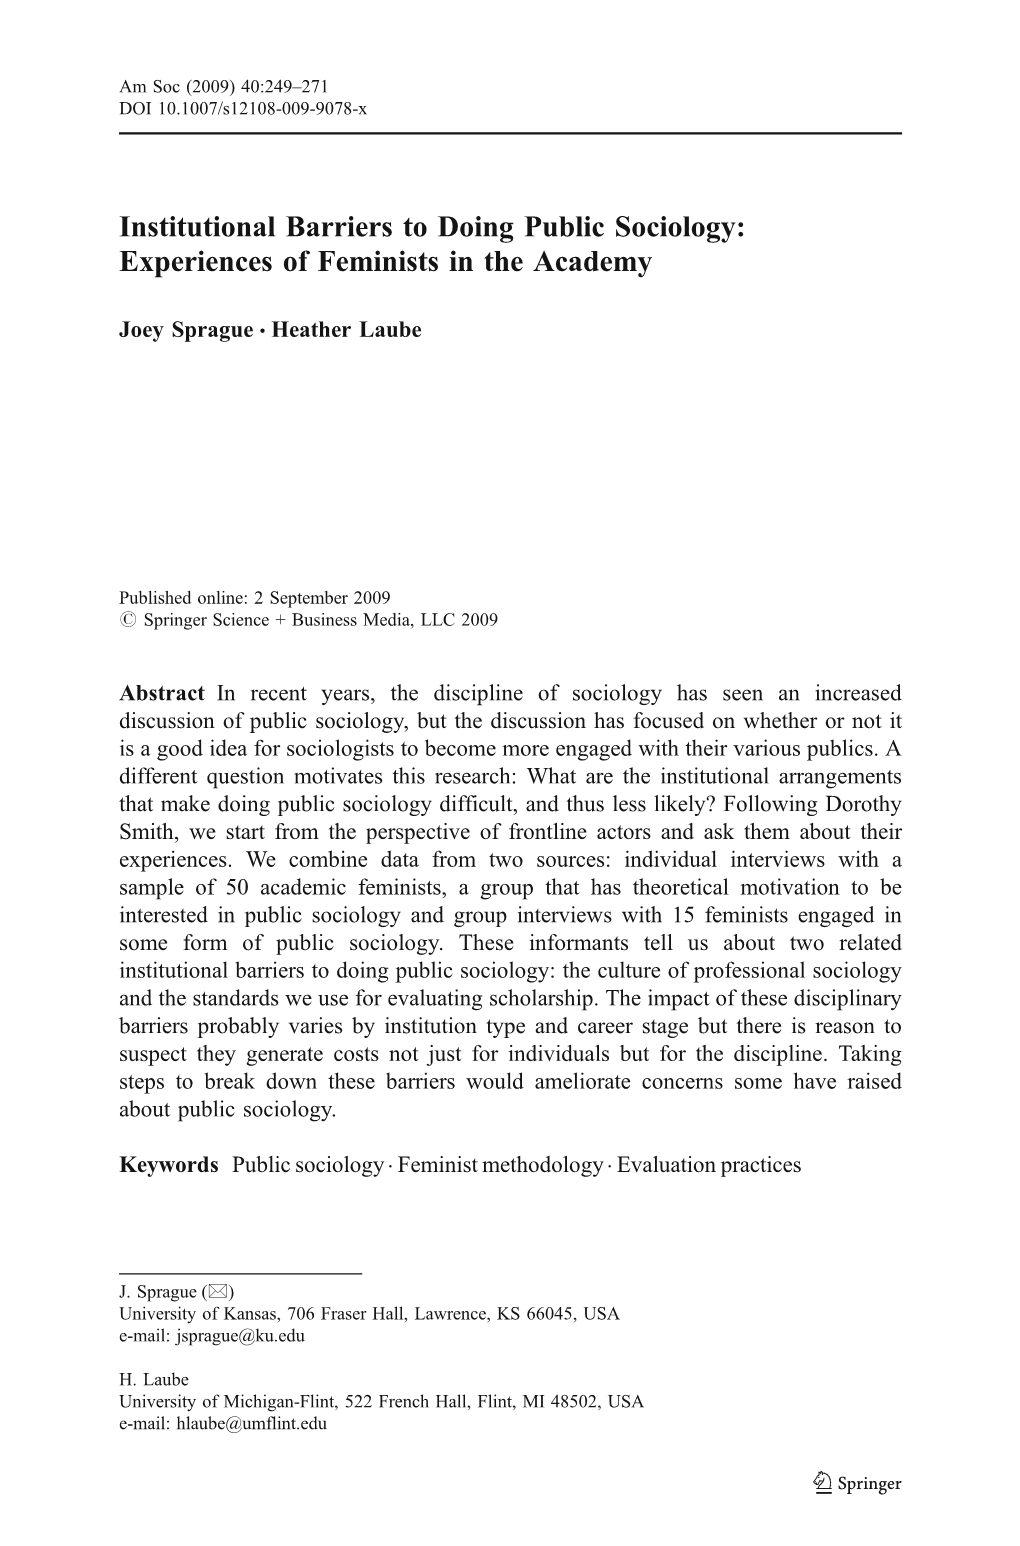 Institutional Barriers to Doing Public Sociology: Experiences of Feminists in the Academy